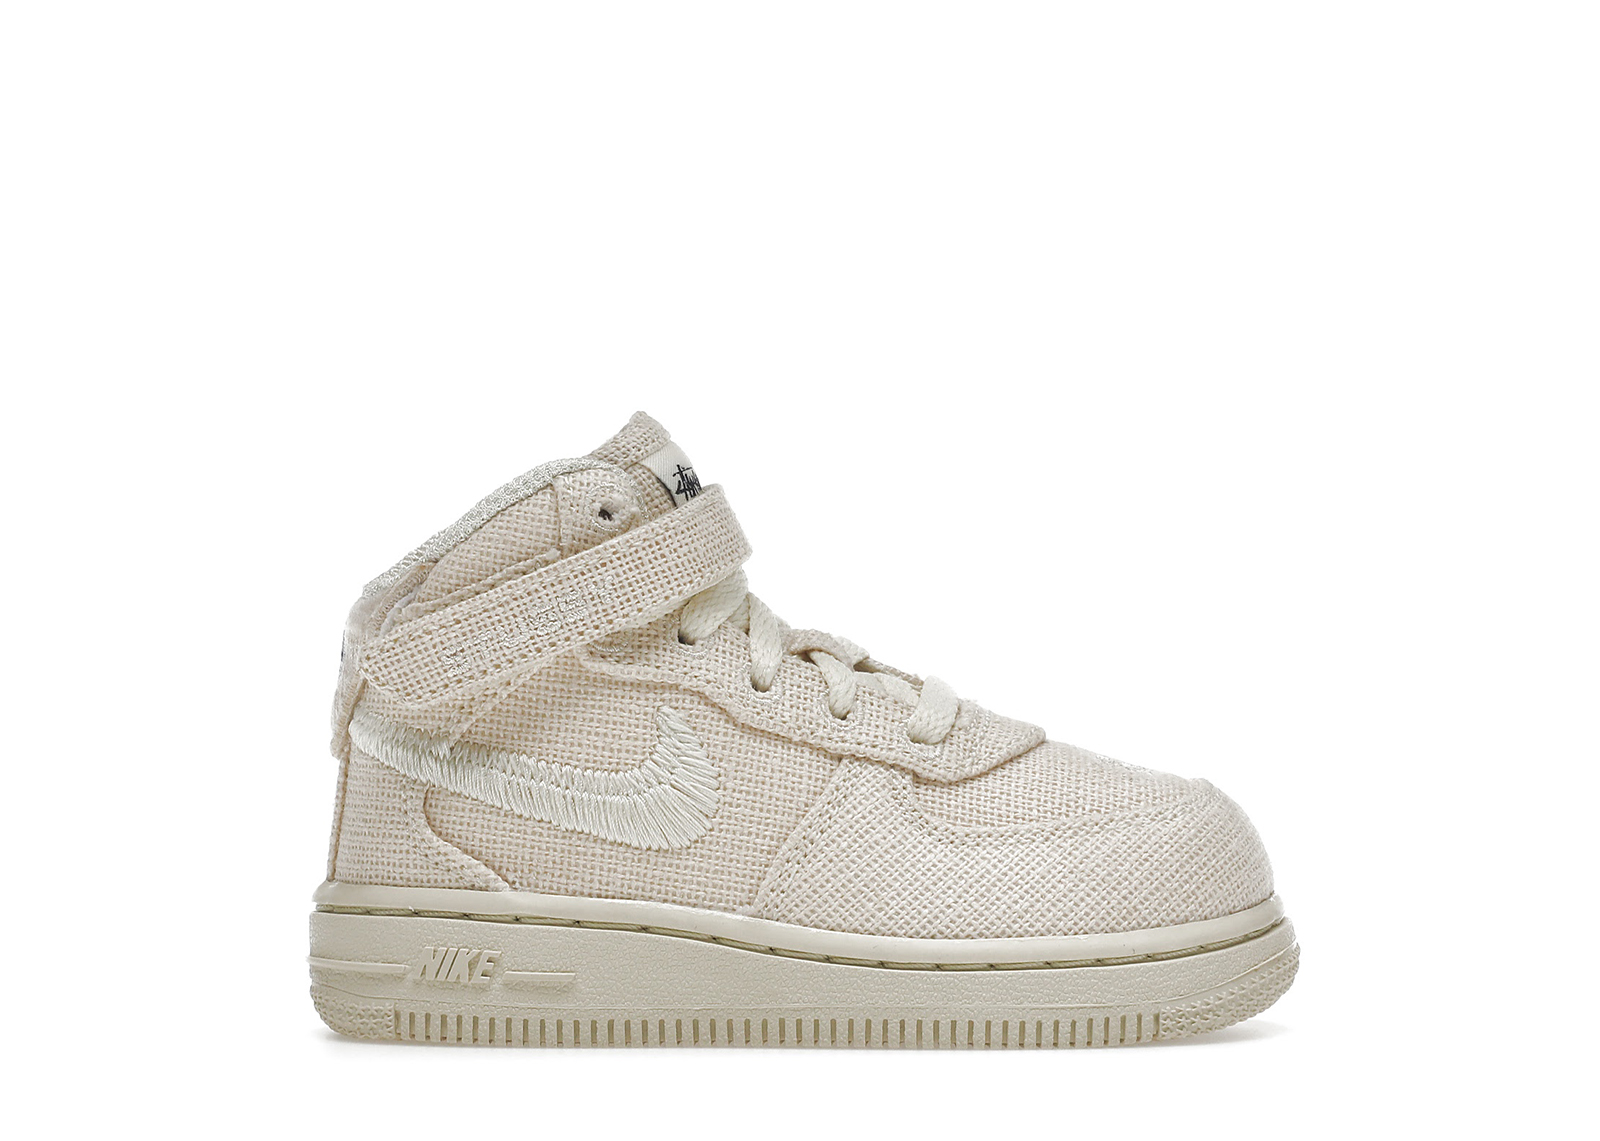 Nike Air Force 1 Mid Stussy Fossil (TD) - DN4159-200 - US